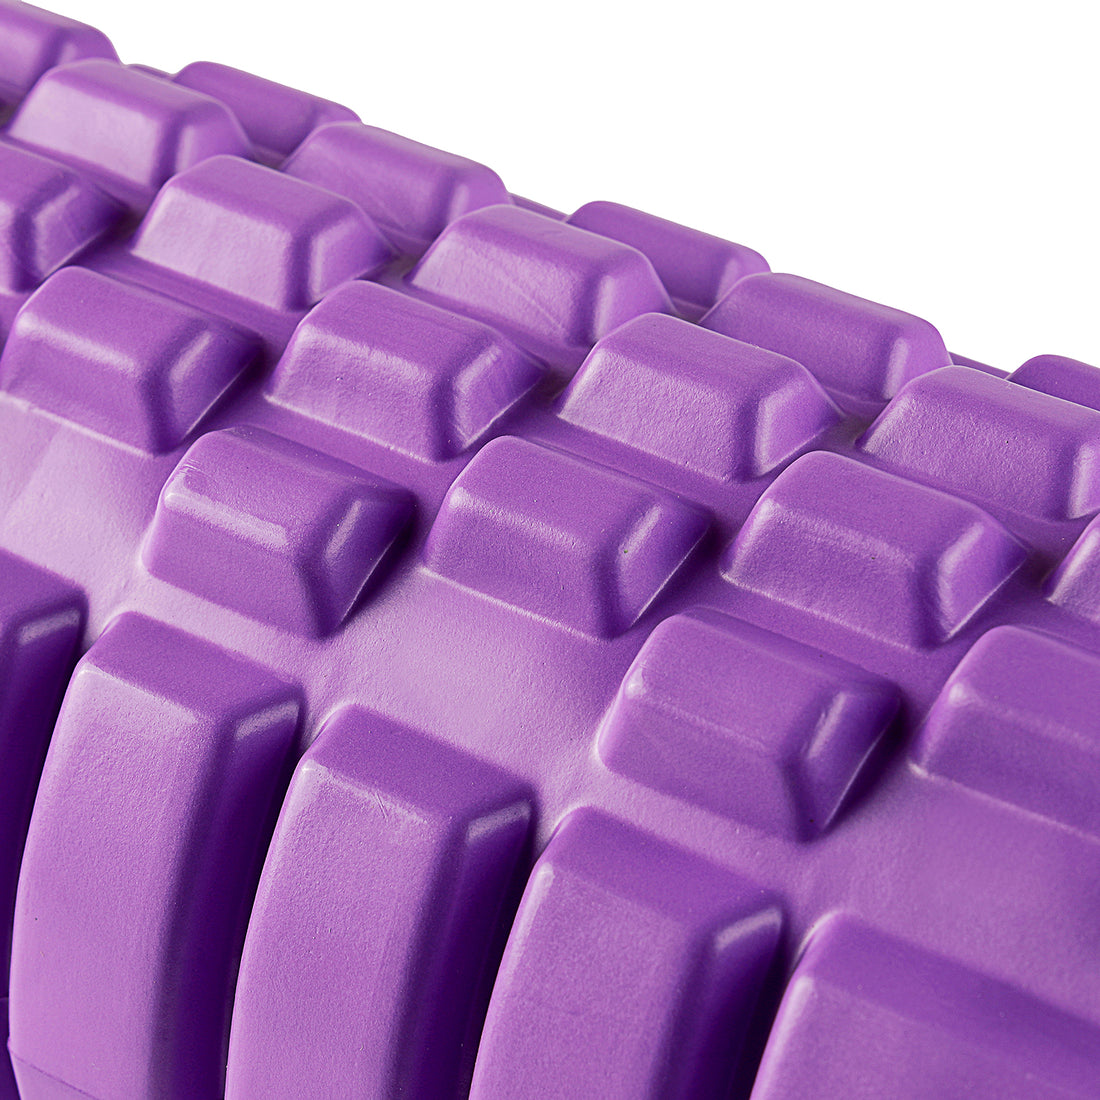 Foam Roller for Exercise at Home